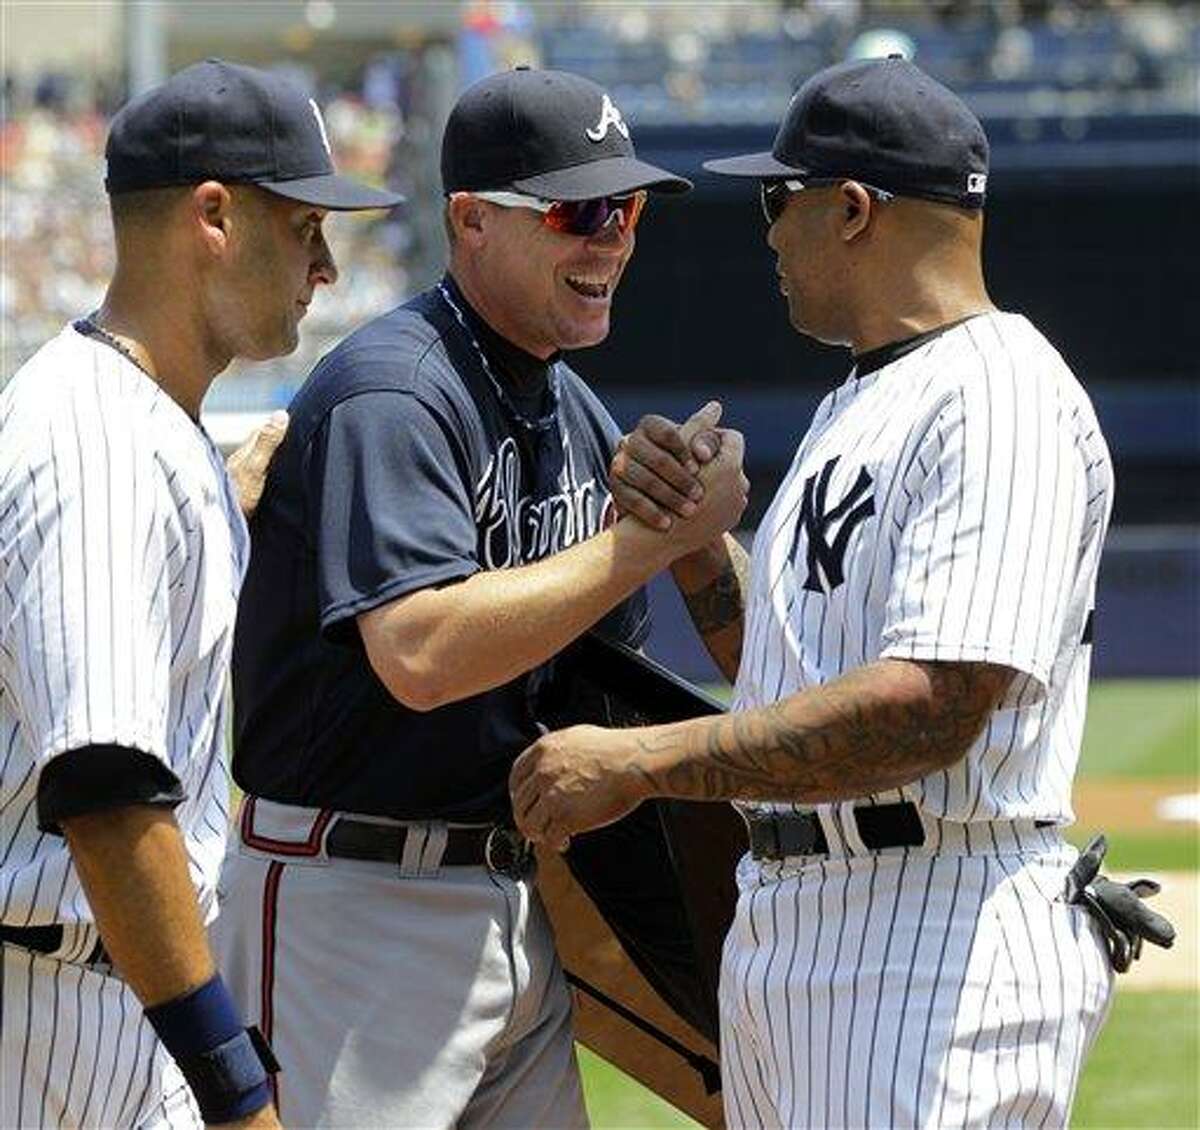 When Braves legend Chipper Jones explained why Alex Rodriguez was sometimes  booed by fans at Yankee stadium